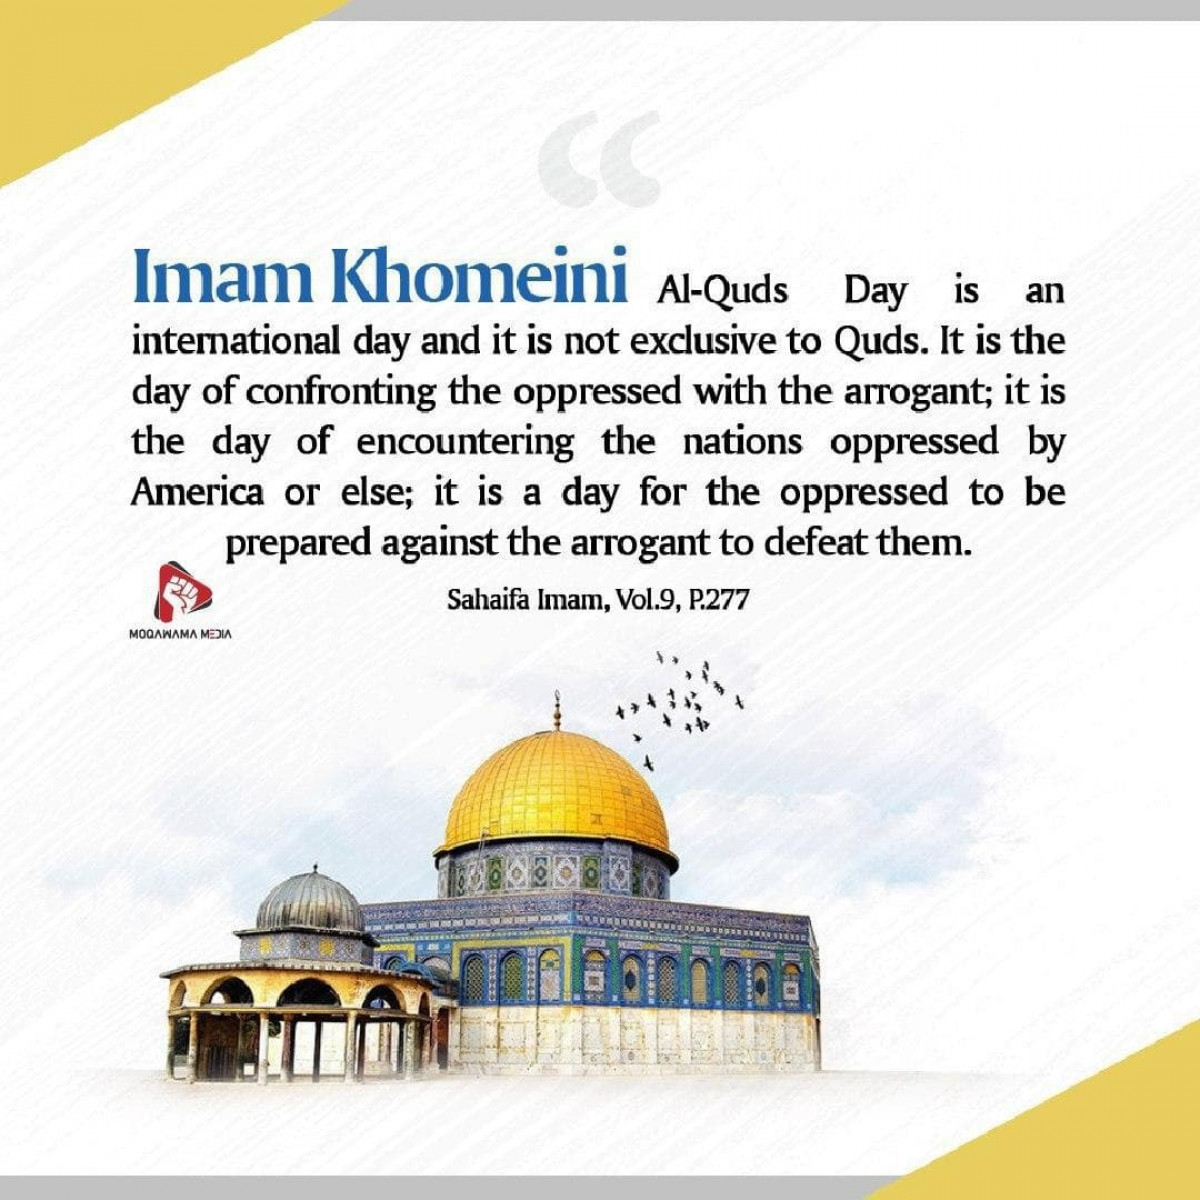 Al-Quds Day is an international day and it is not exclusive to Quds